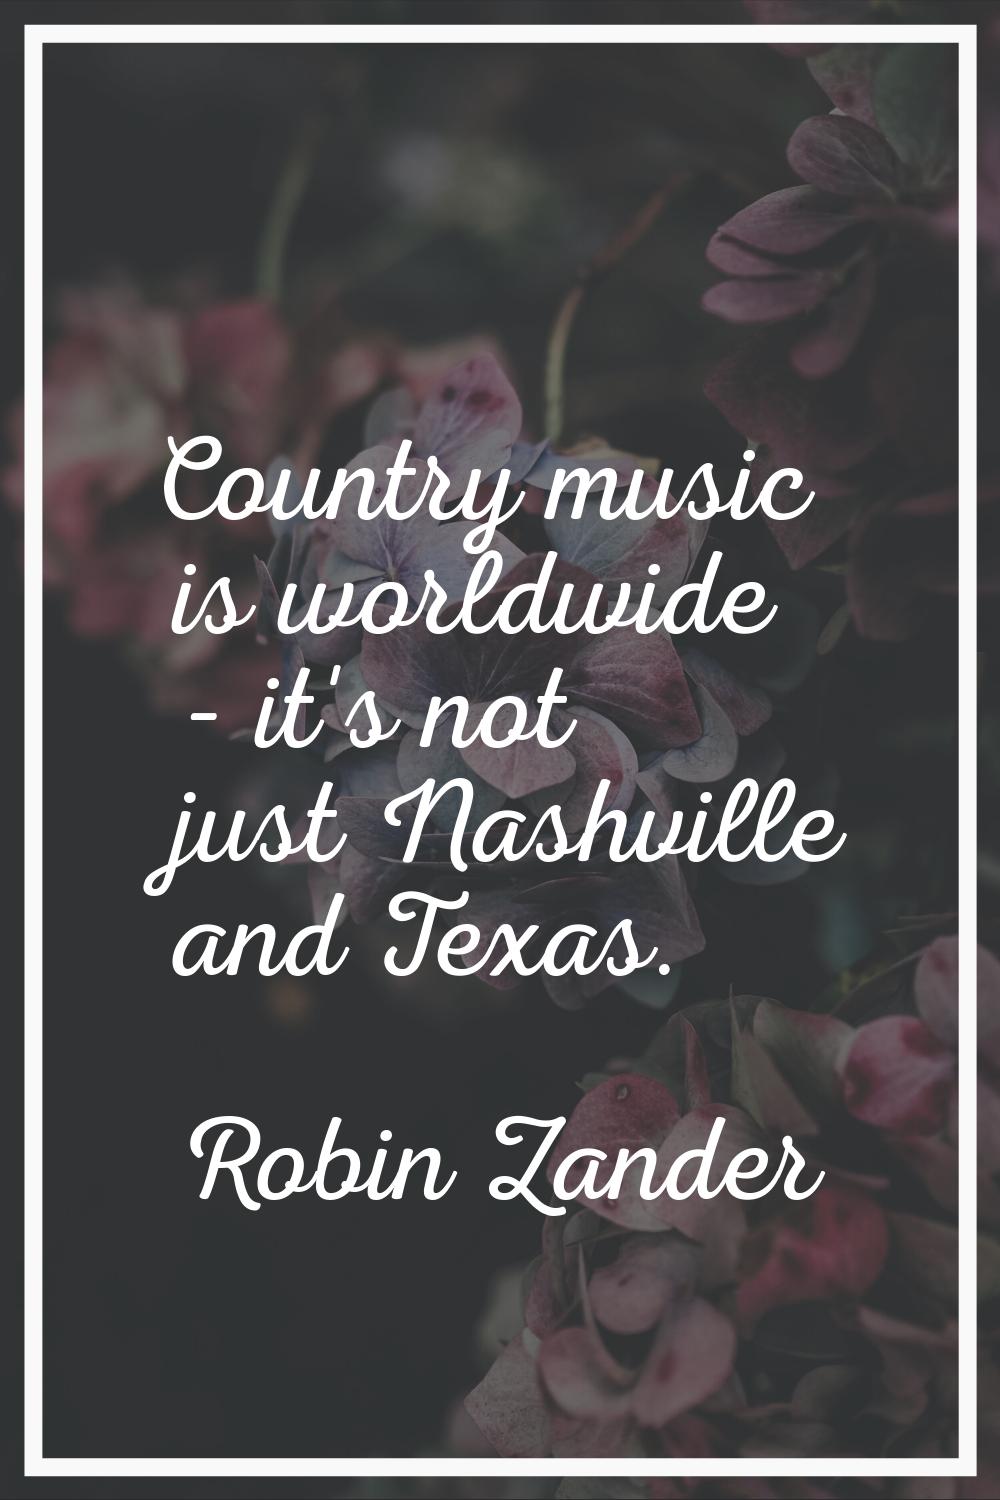 Country music is worldwide - it's not just Nashville and Texas.